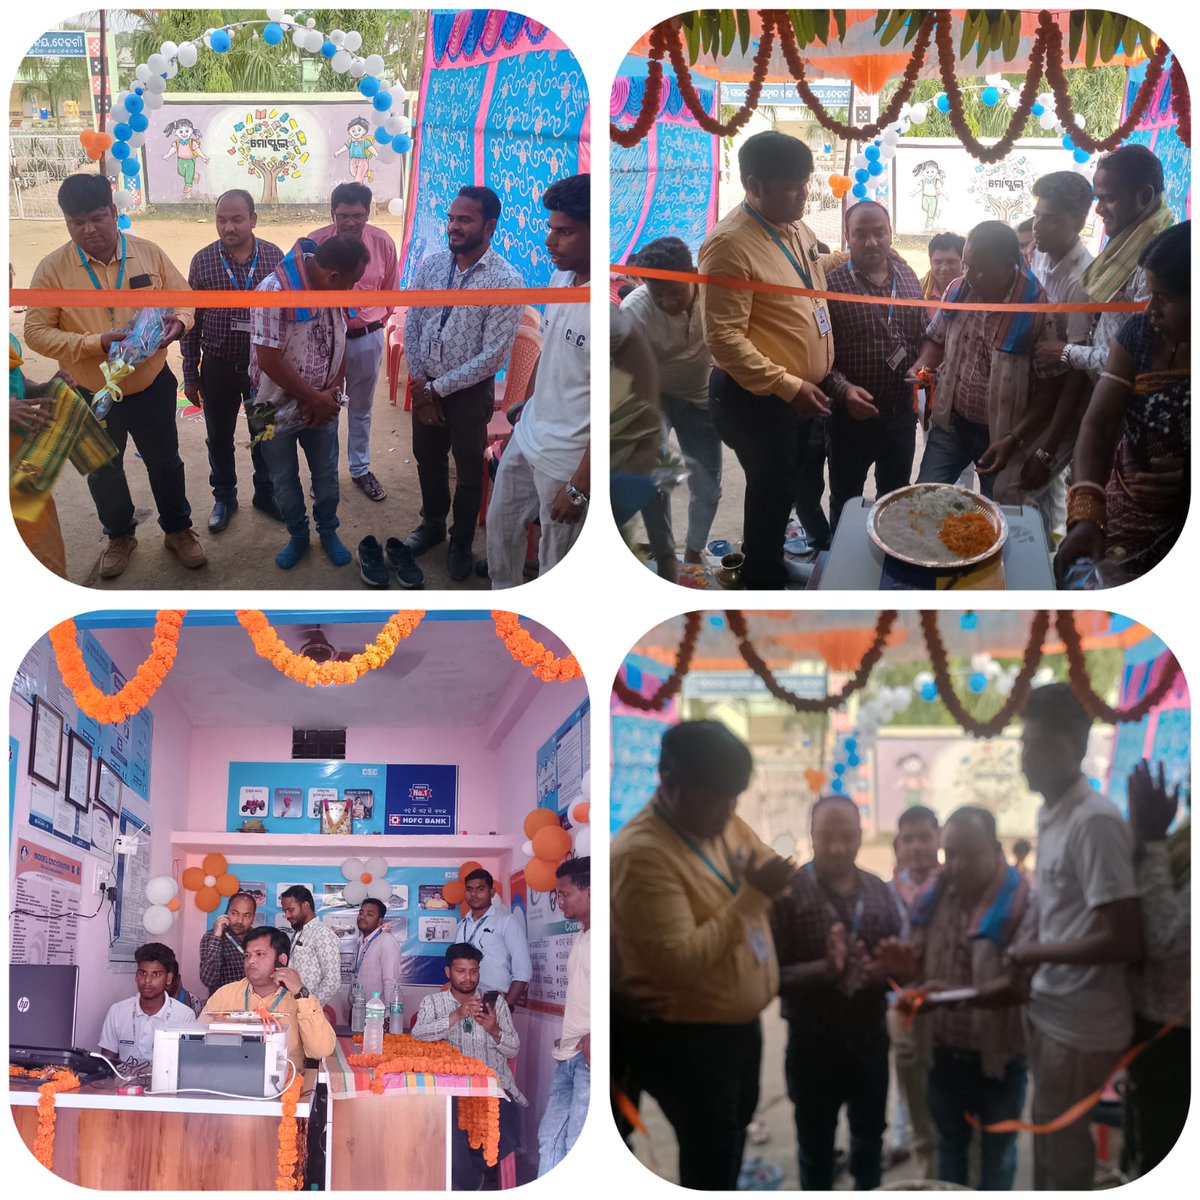 CSC HDFC BC Center inaugurated at URC location in Dedgaon, Balangir, Odisha. BC named Kanta Thapa present along with local Sarpanch, CSC, and HDFC officials. #FinancialInclusion #BankingServices